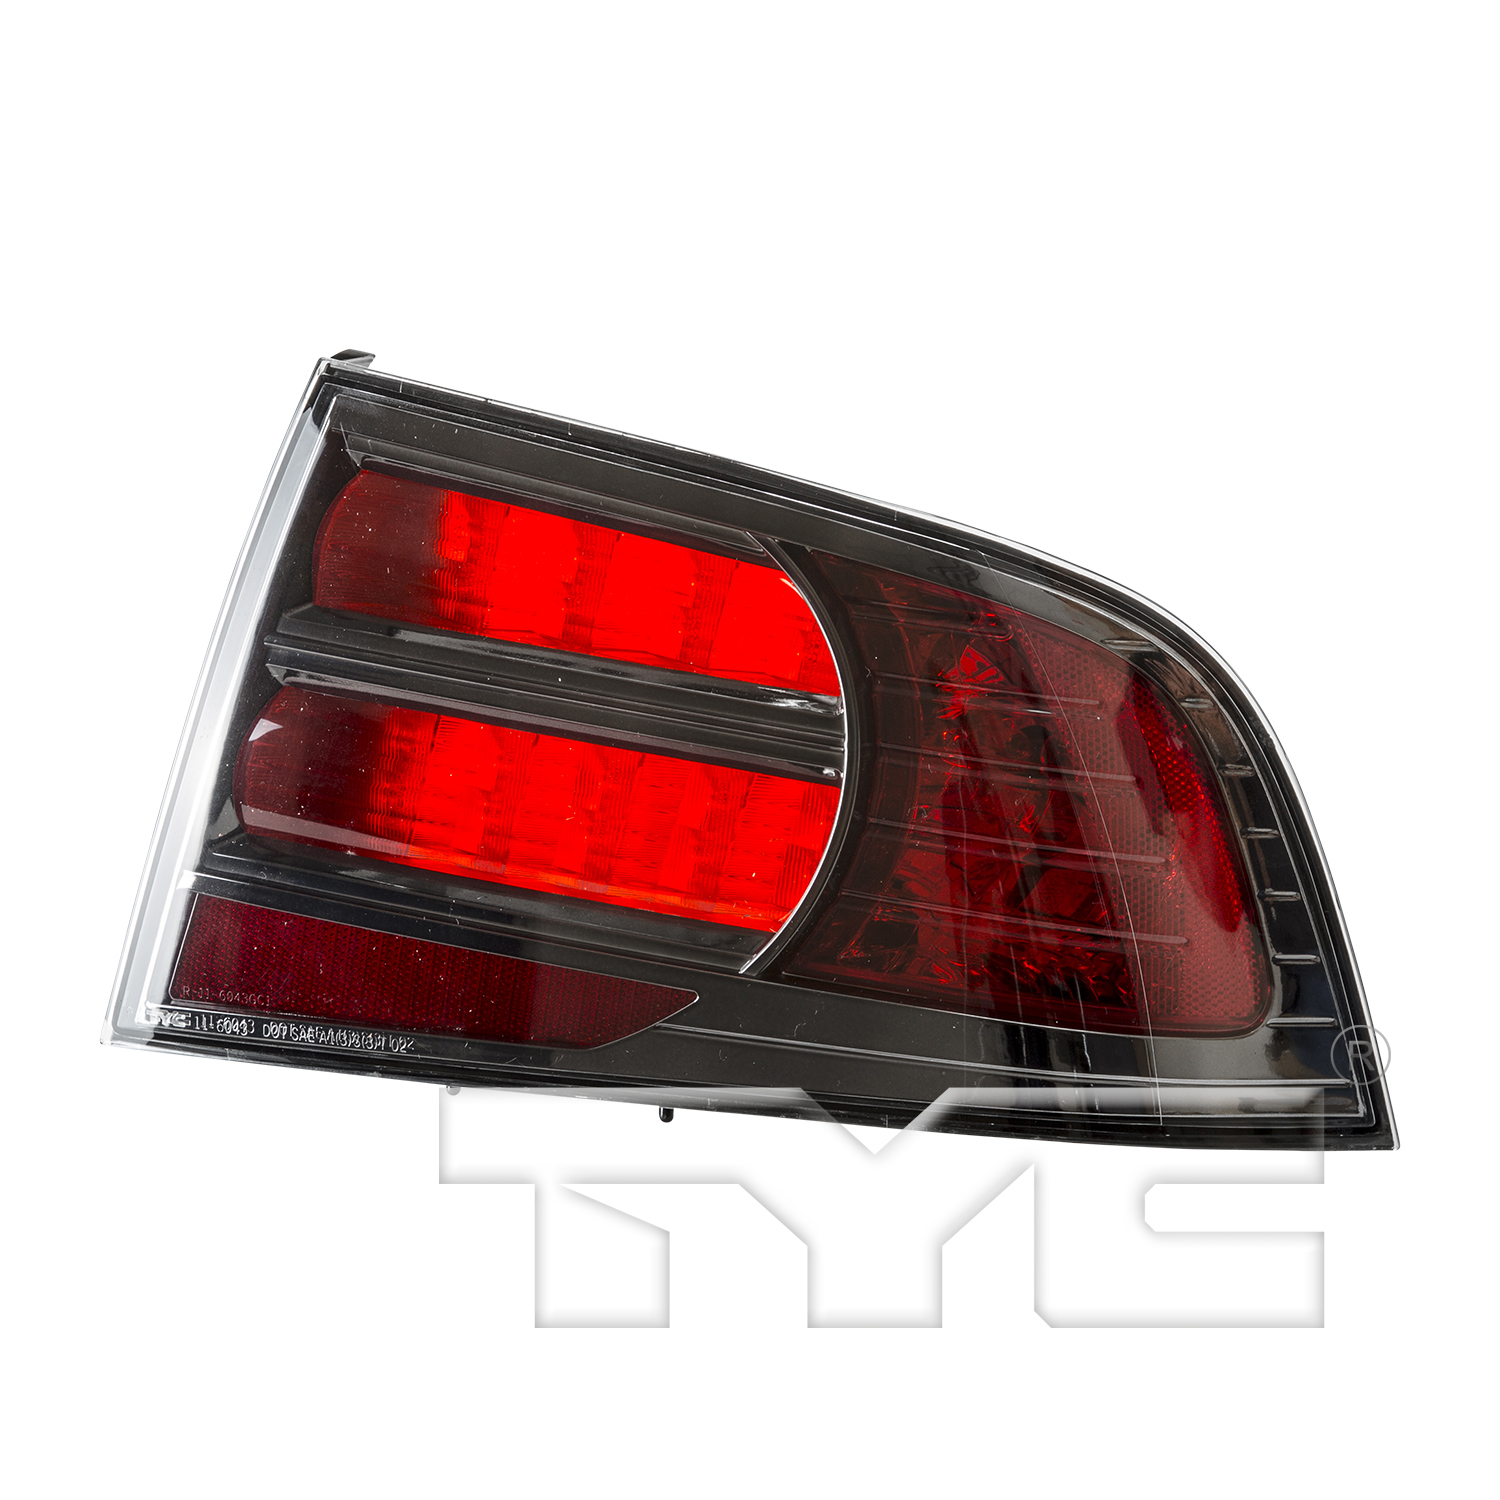 Aftermarket TAILLIGHTS for ACURA - TL, TL,07-08,RT Taillamp lens/housing